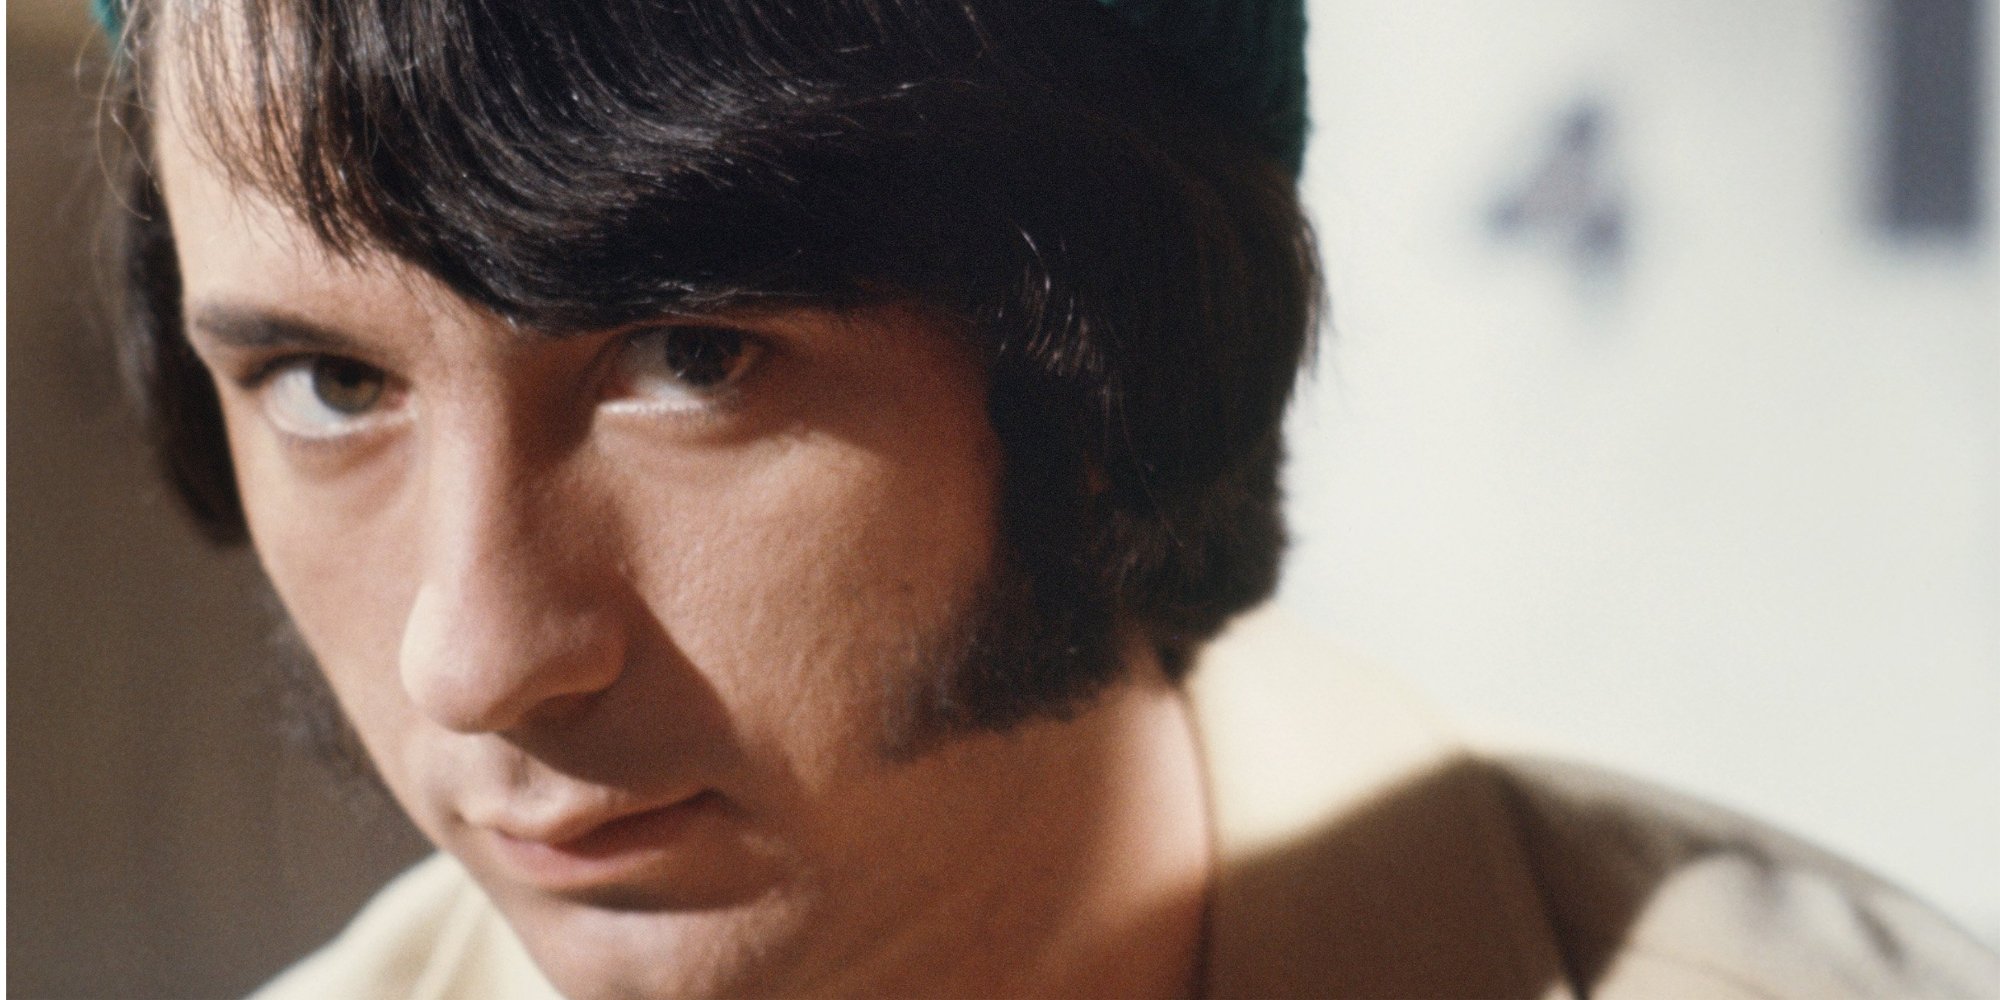 Mike Nesmith in a scene still from The Monkees, wrote the song 'Tapioca Tundra.'